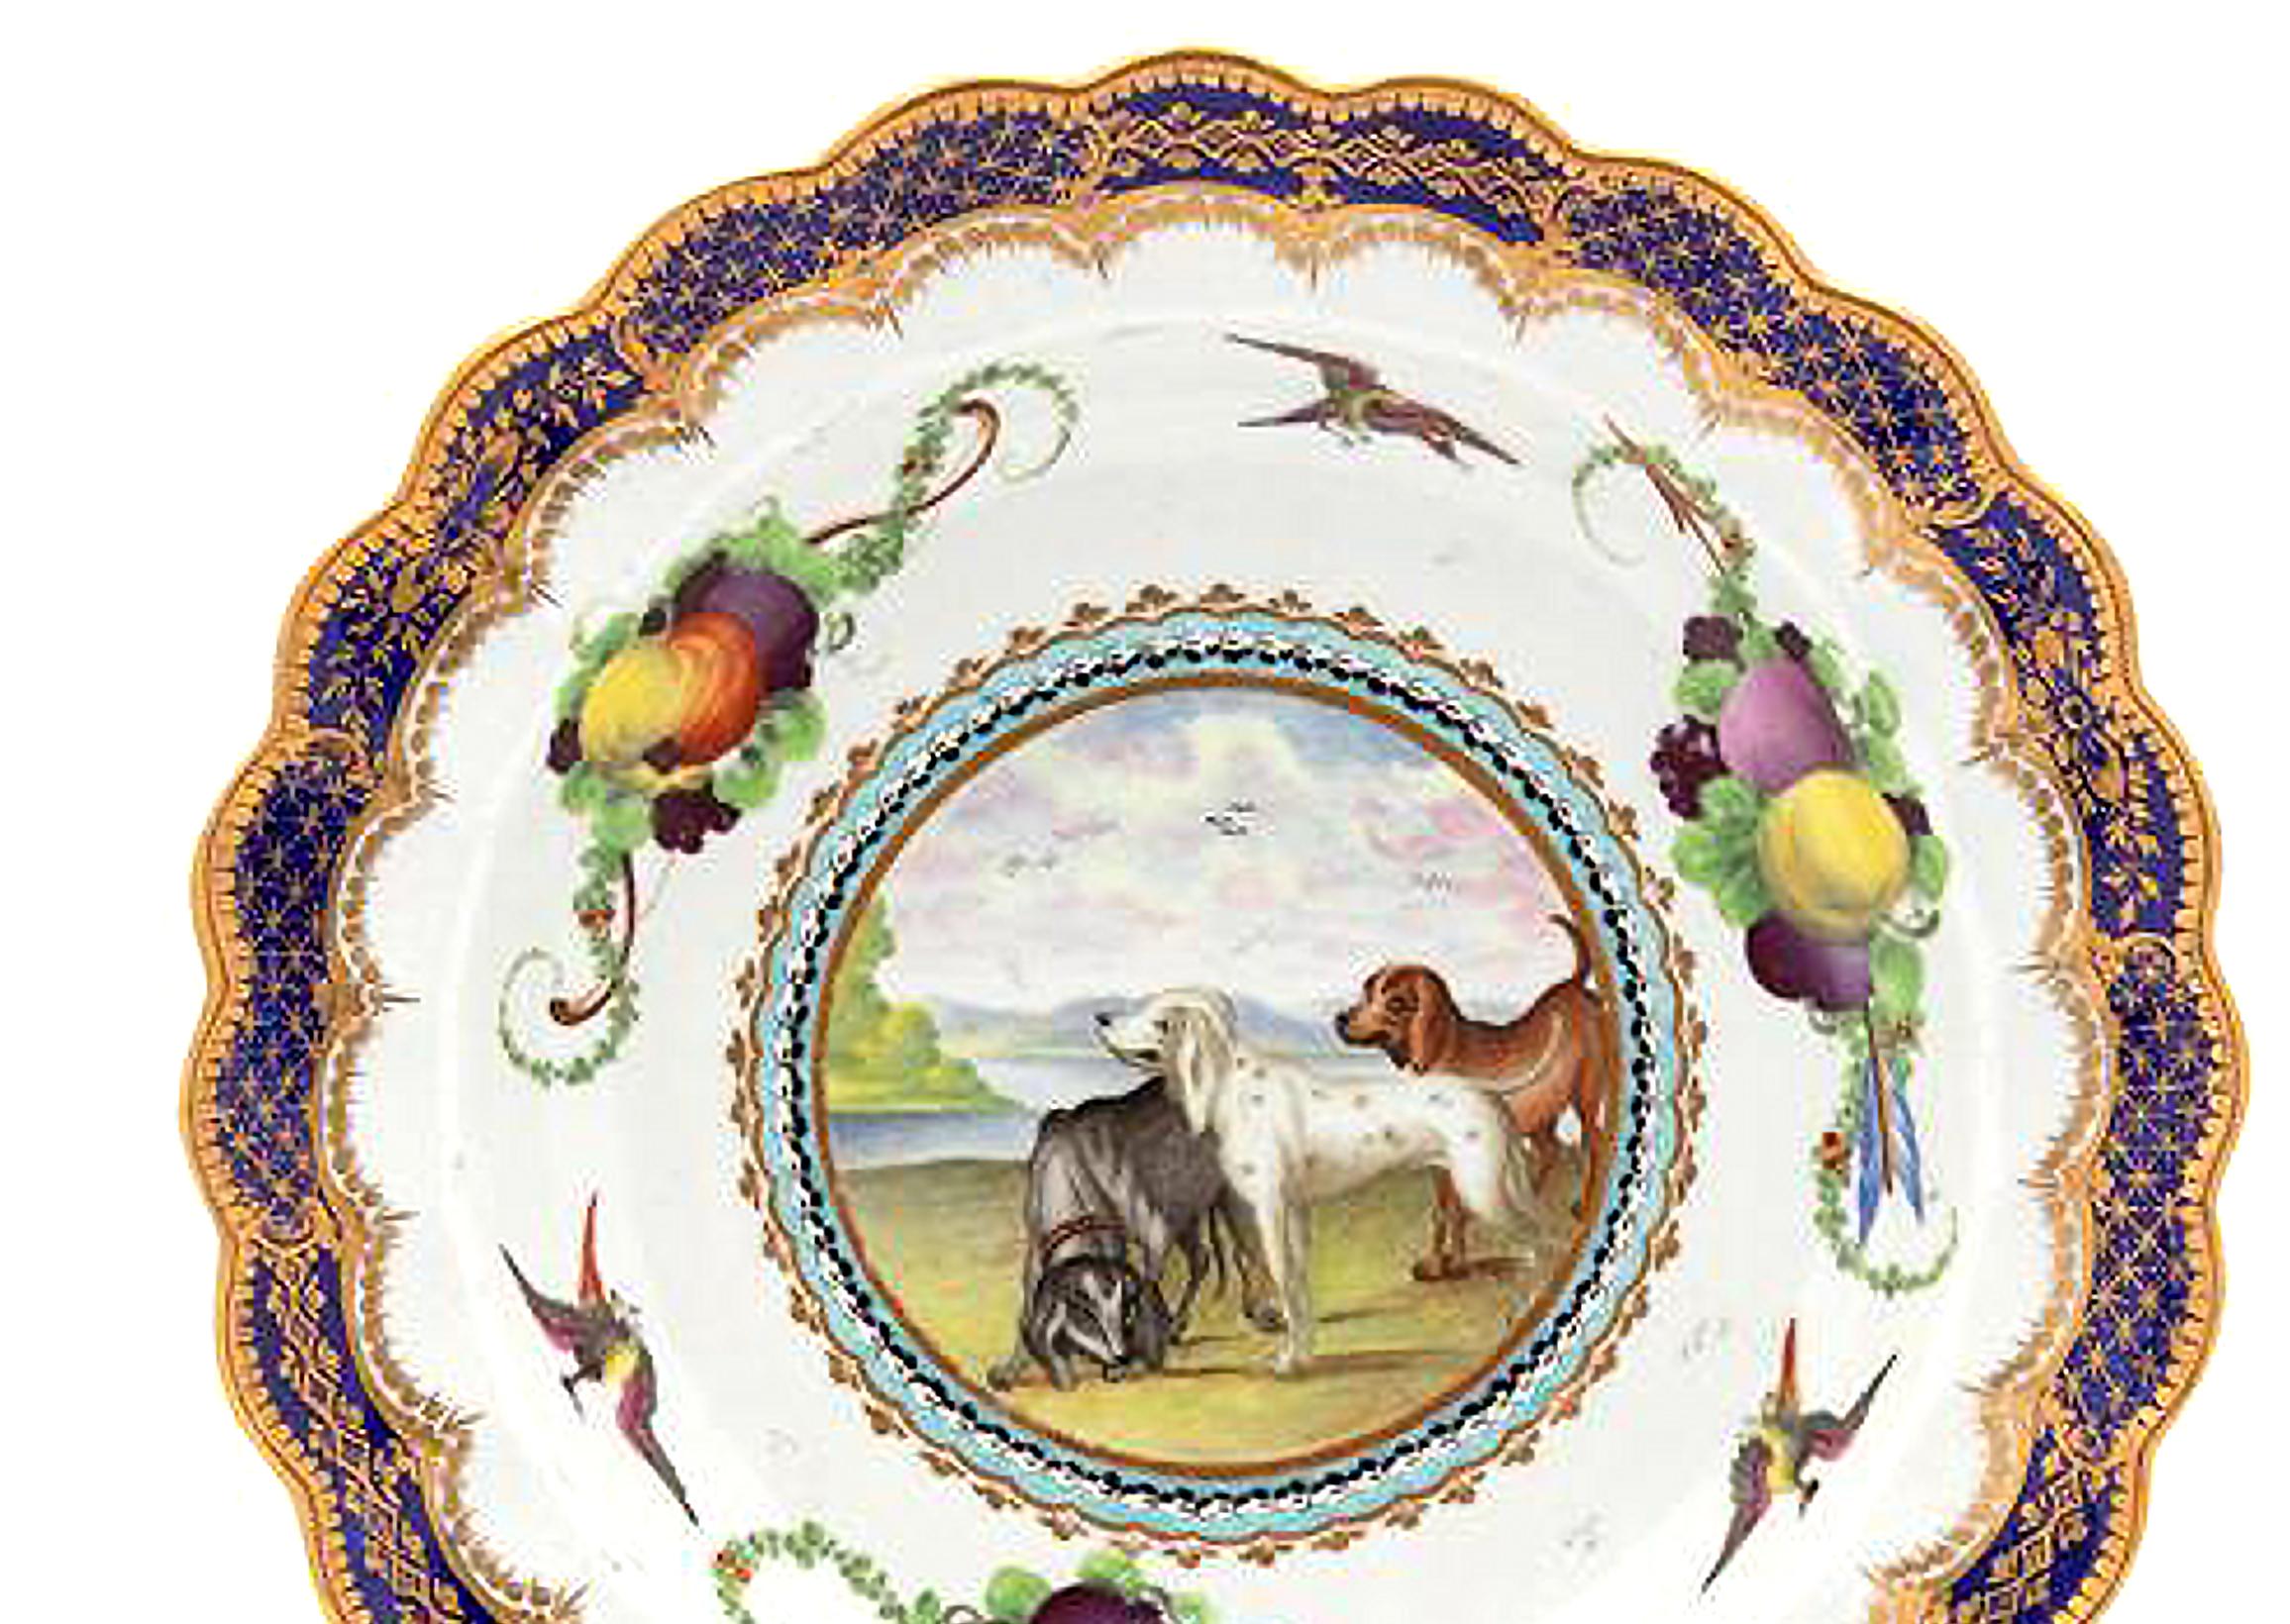 First period Worcester porcelain fable plate,
Lord Henry Thynne Pattern,
Painting in Jefferyes Hamett O'Neale style,
circa 1775.

The First Period Worcester porcelain scalloped plate is painted with a central circular reserved panel with hounds